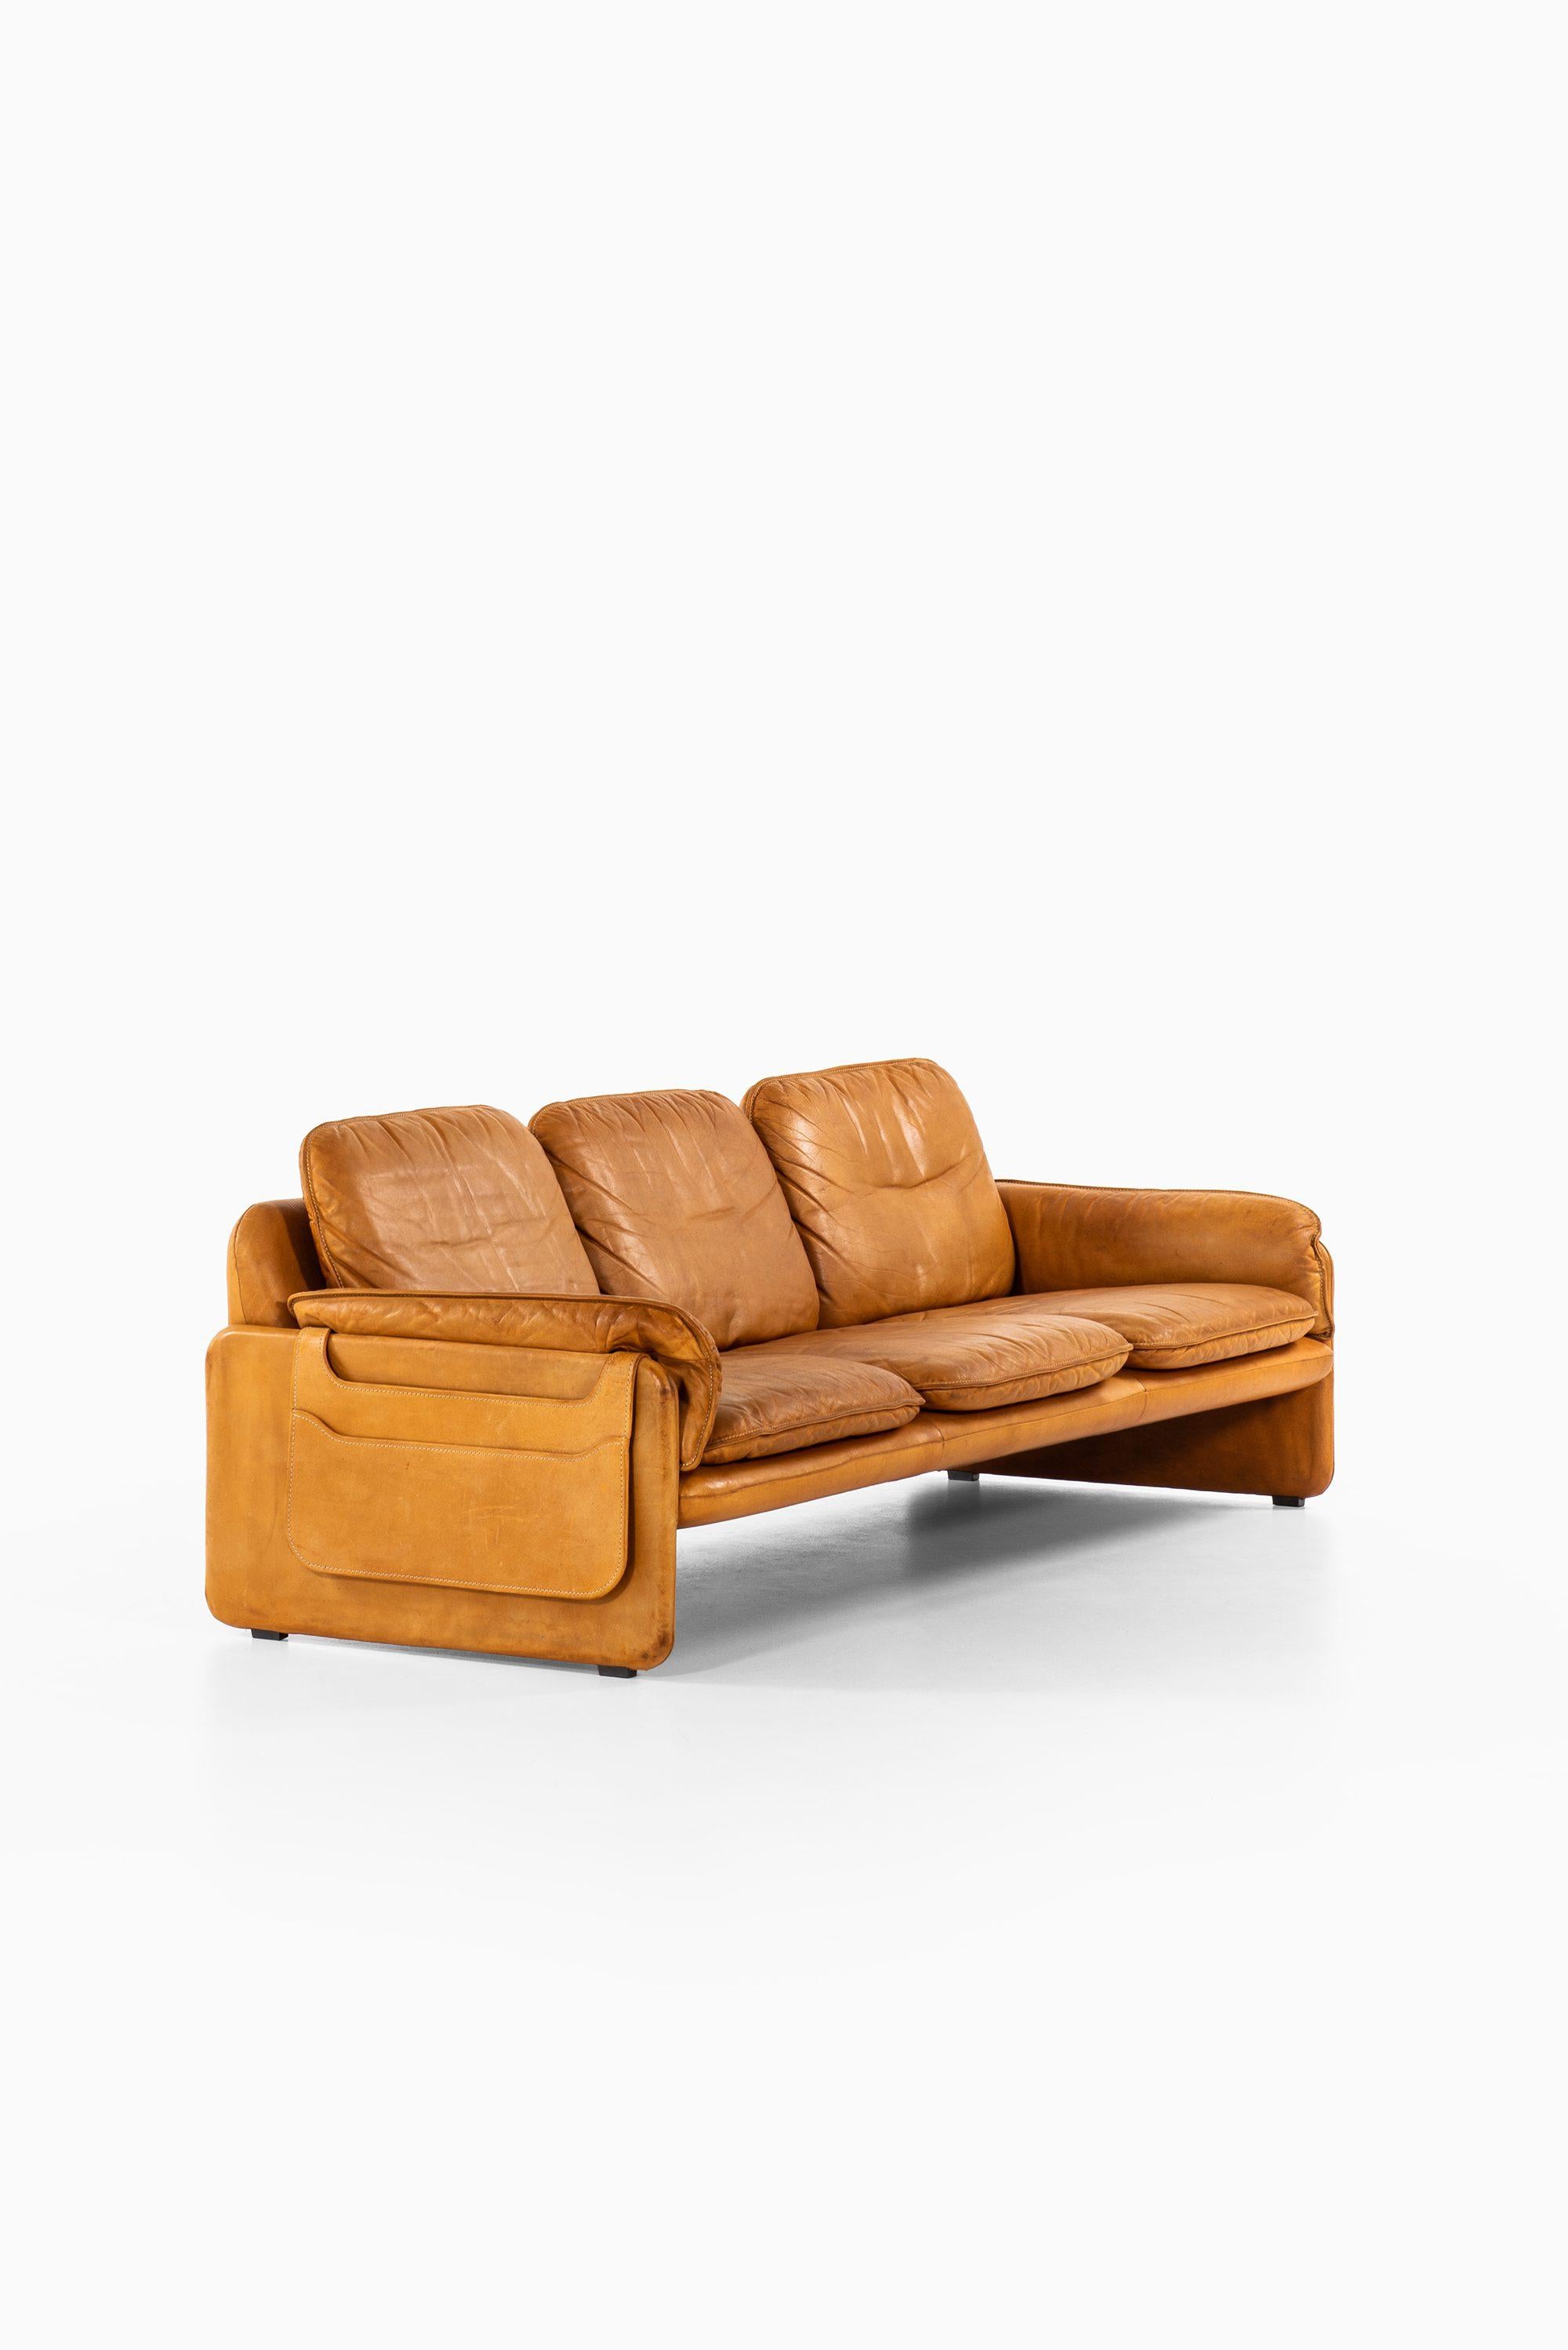 Leather Sofa Model DS-61 Produced by De Sede in Switzerland For Sale